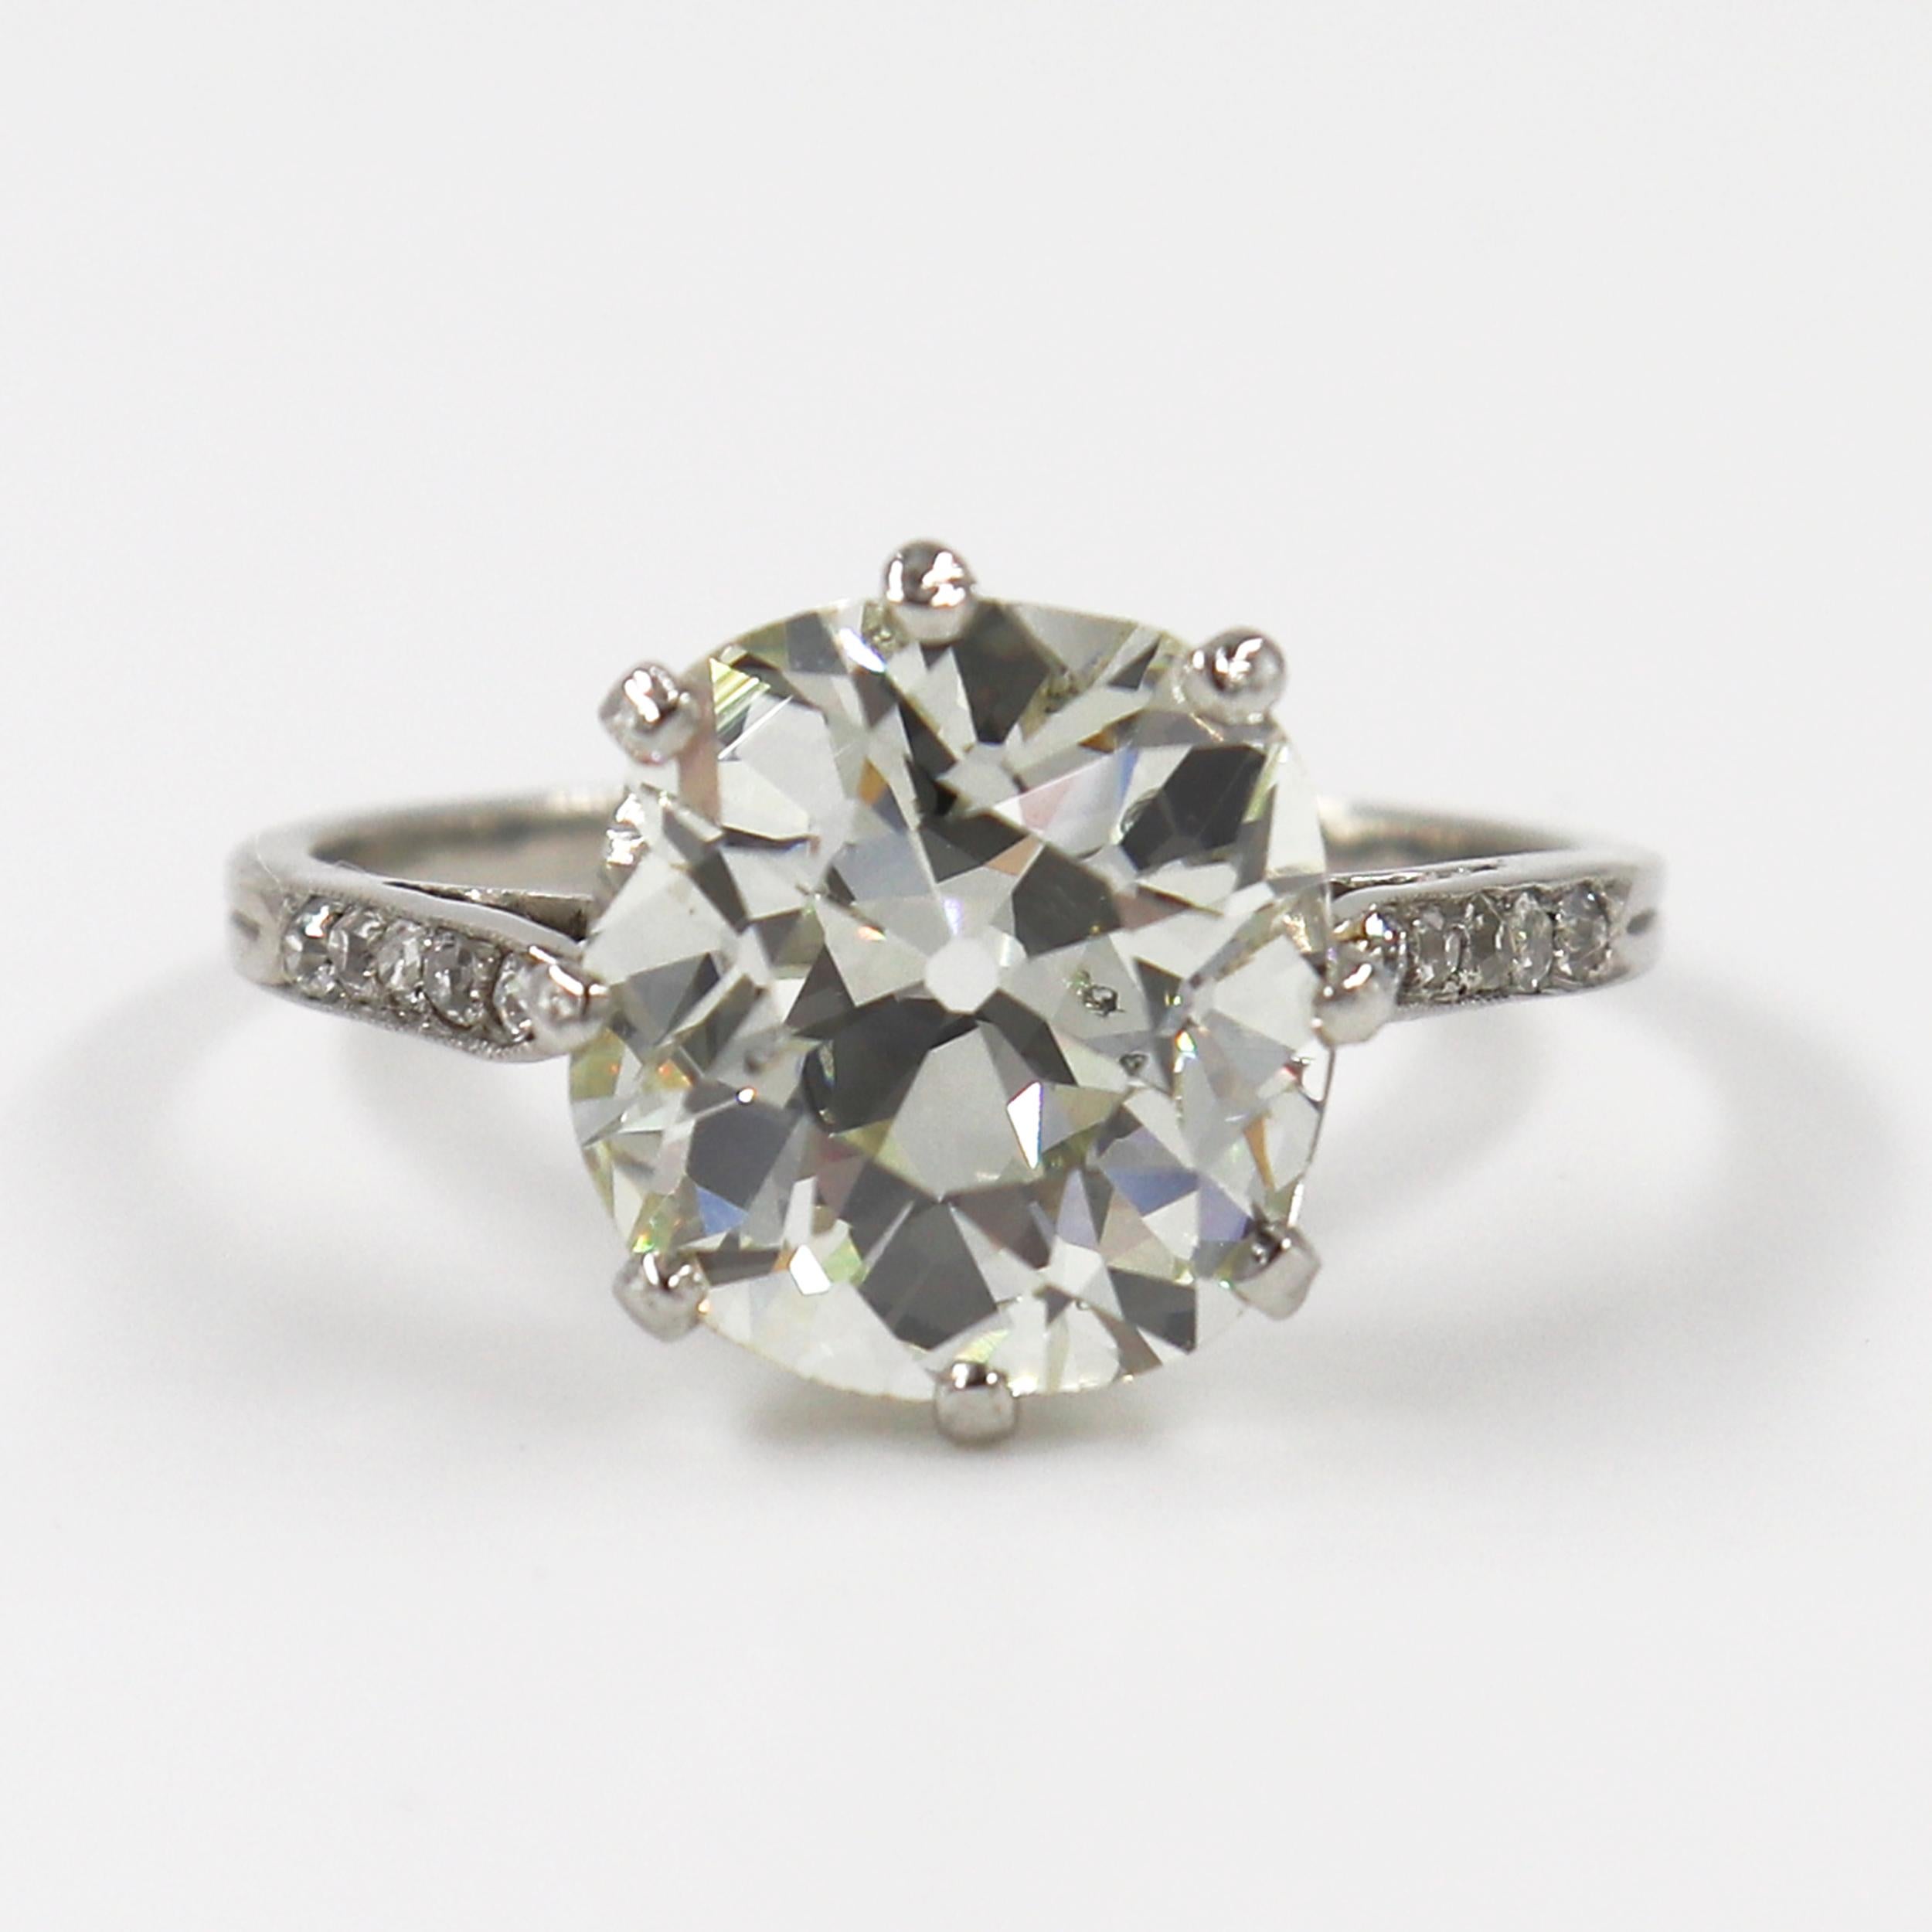 This platinum ring with Bright-Cut Pave features a 4.95ct Old Miner Diamond with L color and SI1 clarity. 

This ring is a size US 7.75 

Purchase includes a GIA Diamond Grading Report 2211417415. Sizing is complimentary with purchase. 

Type: